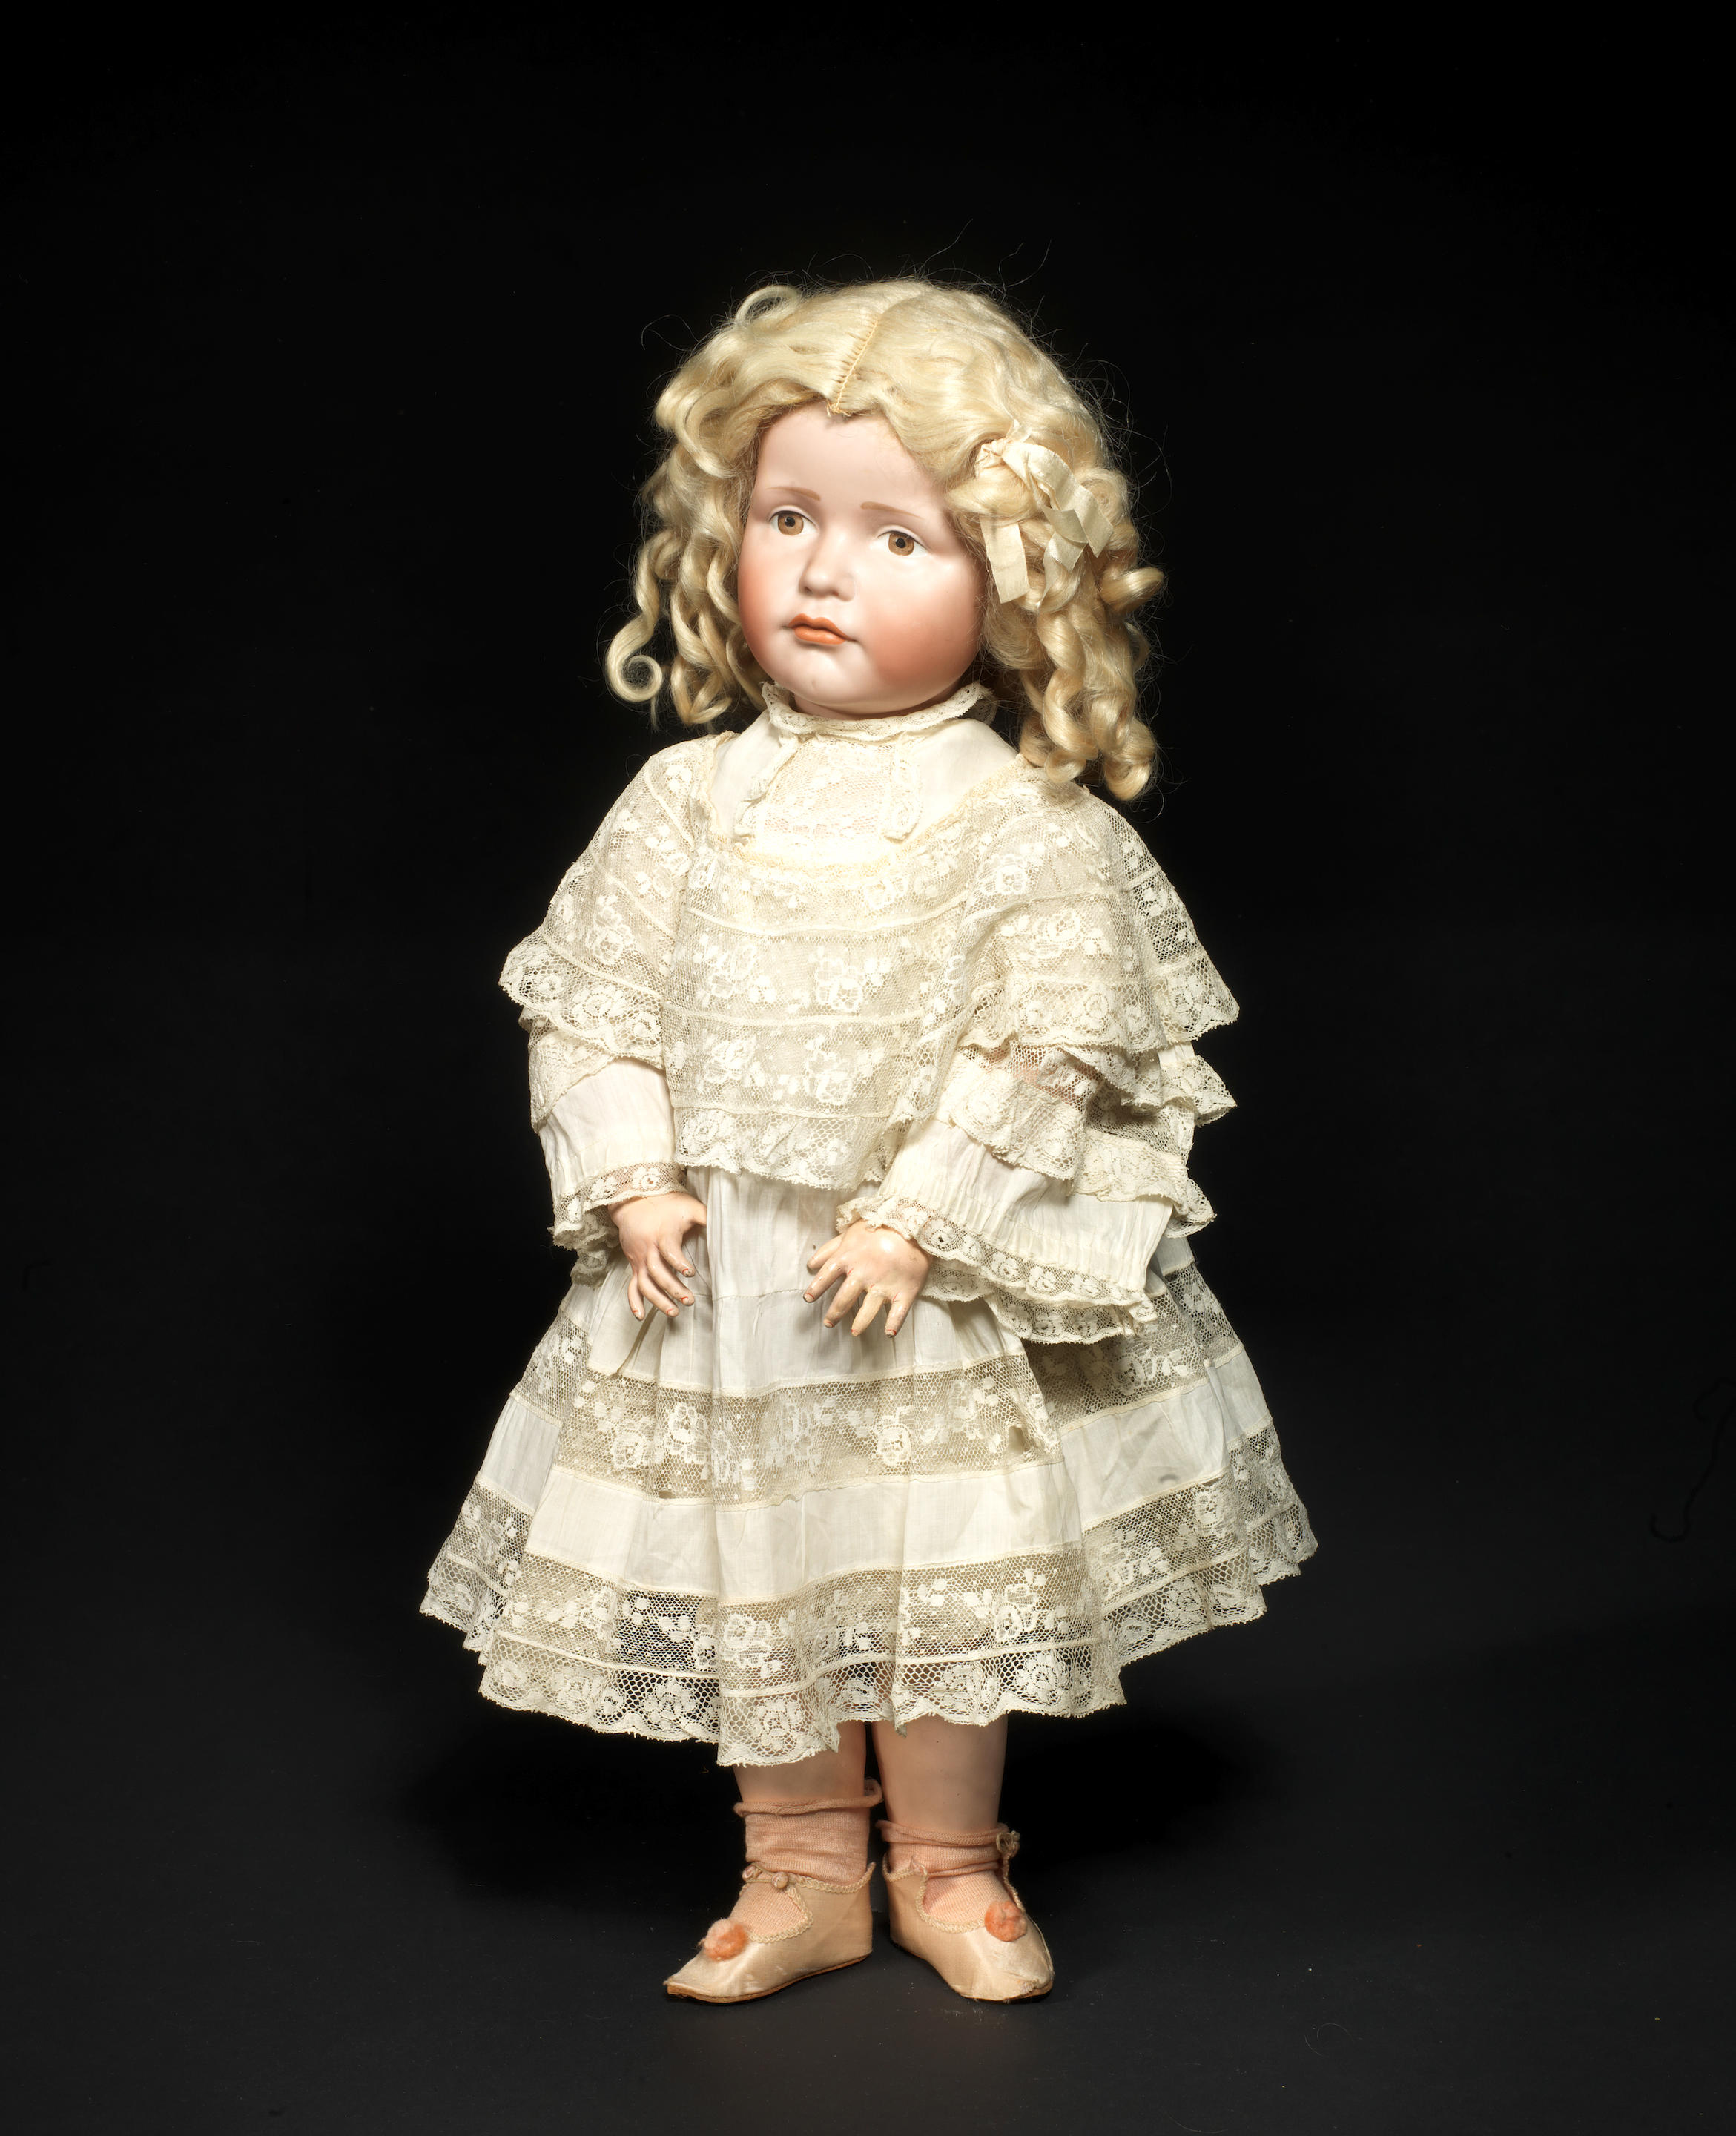 Bonhams Sells Most Expensive Doll in the World for £242,500